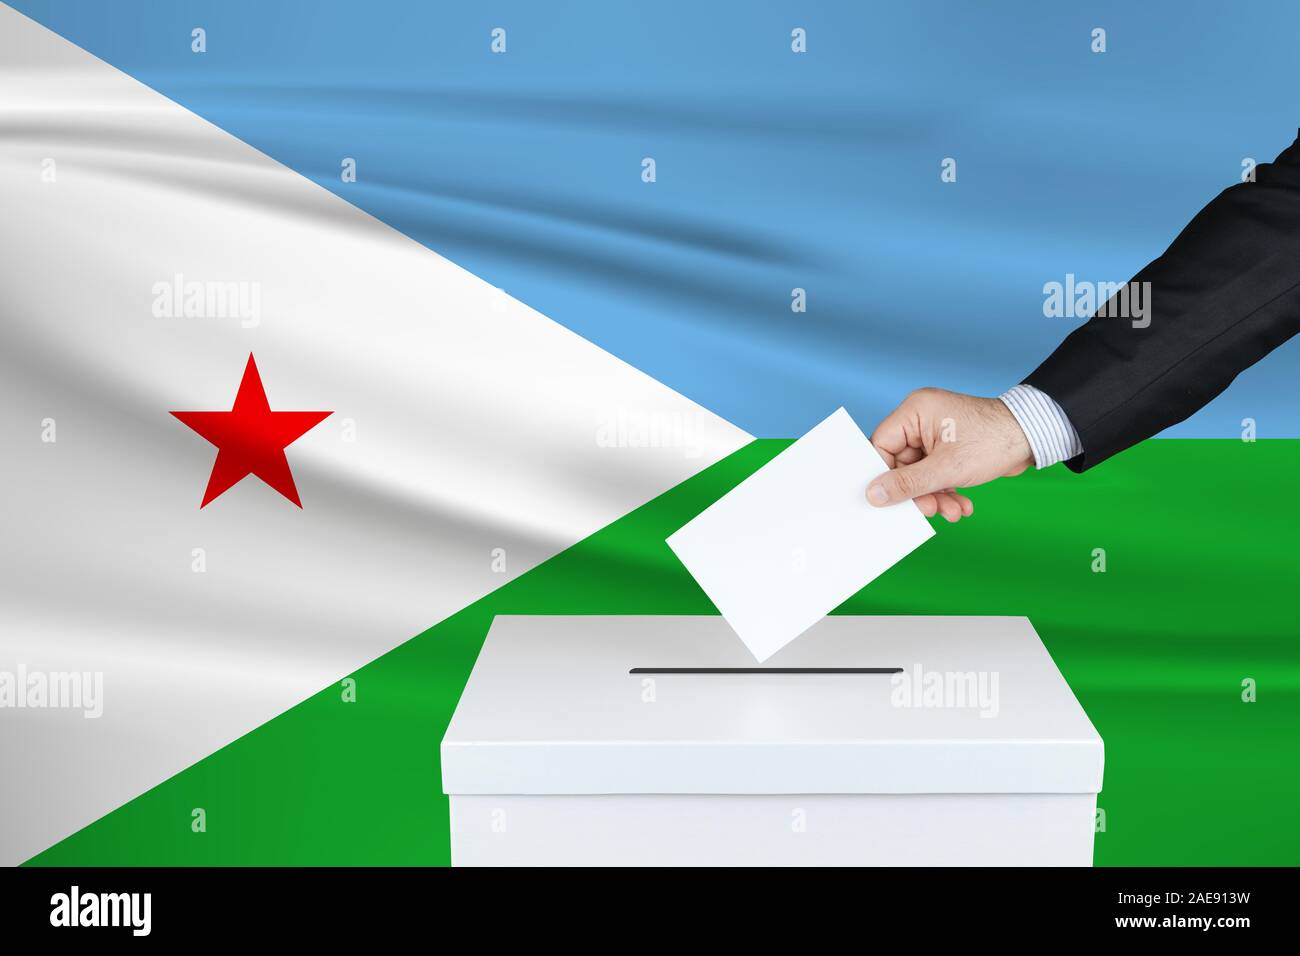 Election in Djibouti. The hand of man putting his vote in the ballot box. Waved Djibouti flag on background. Stock Photo